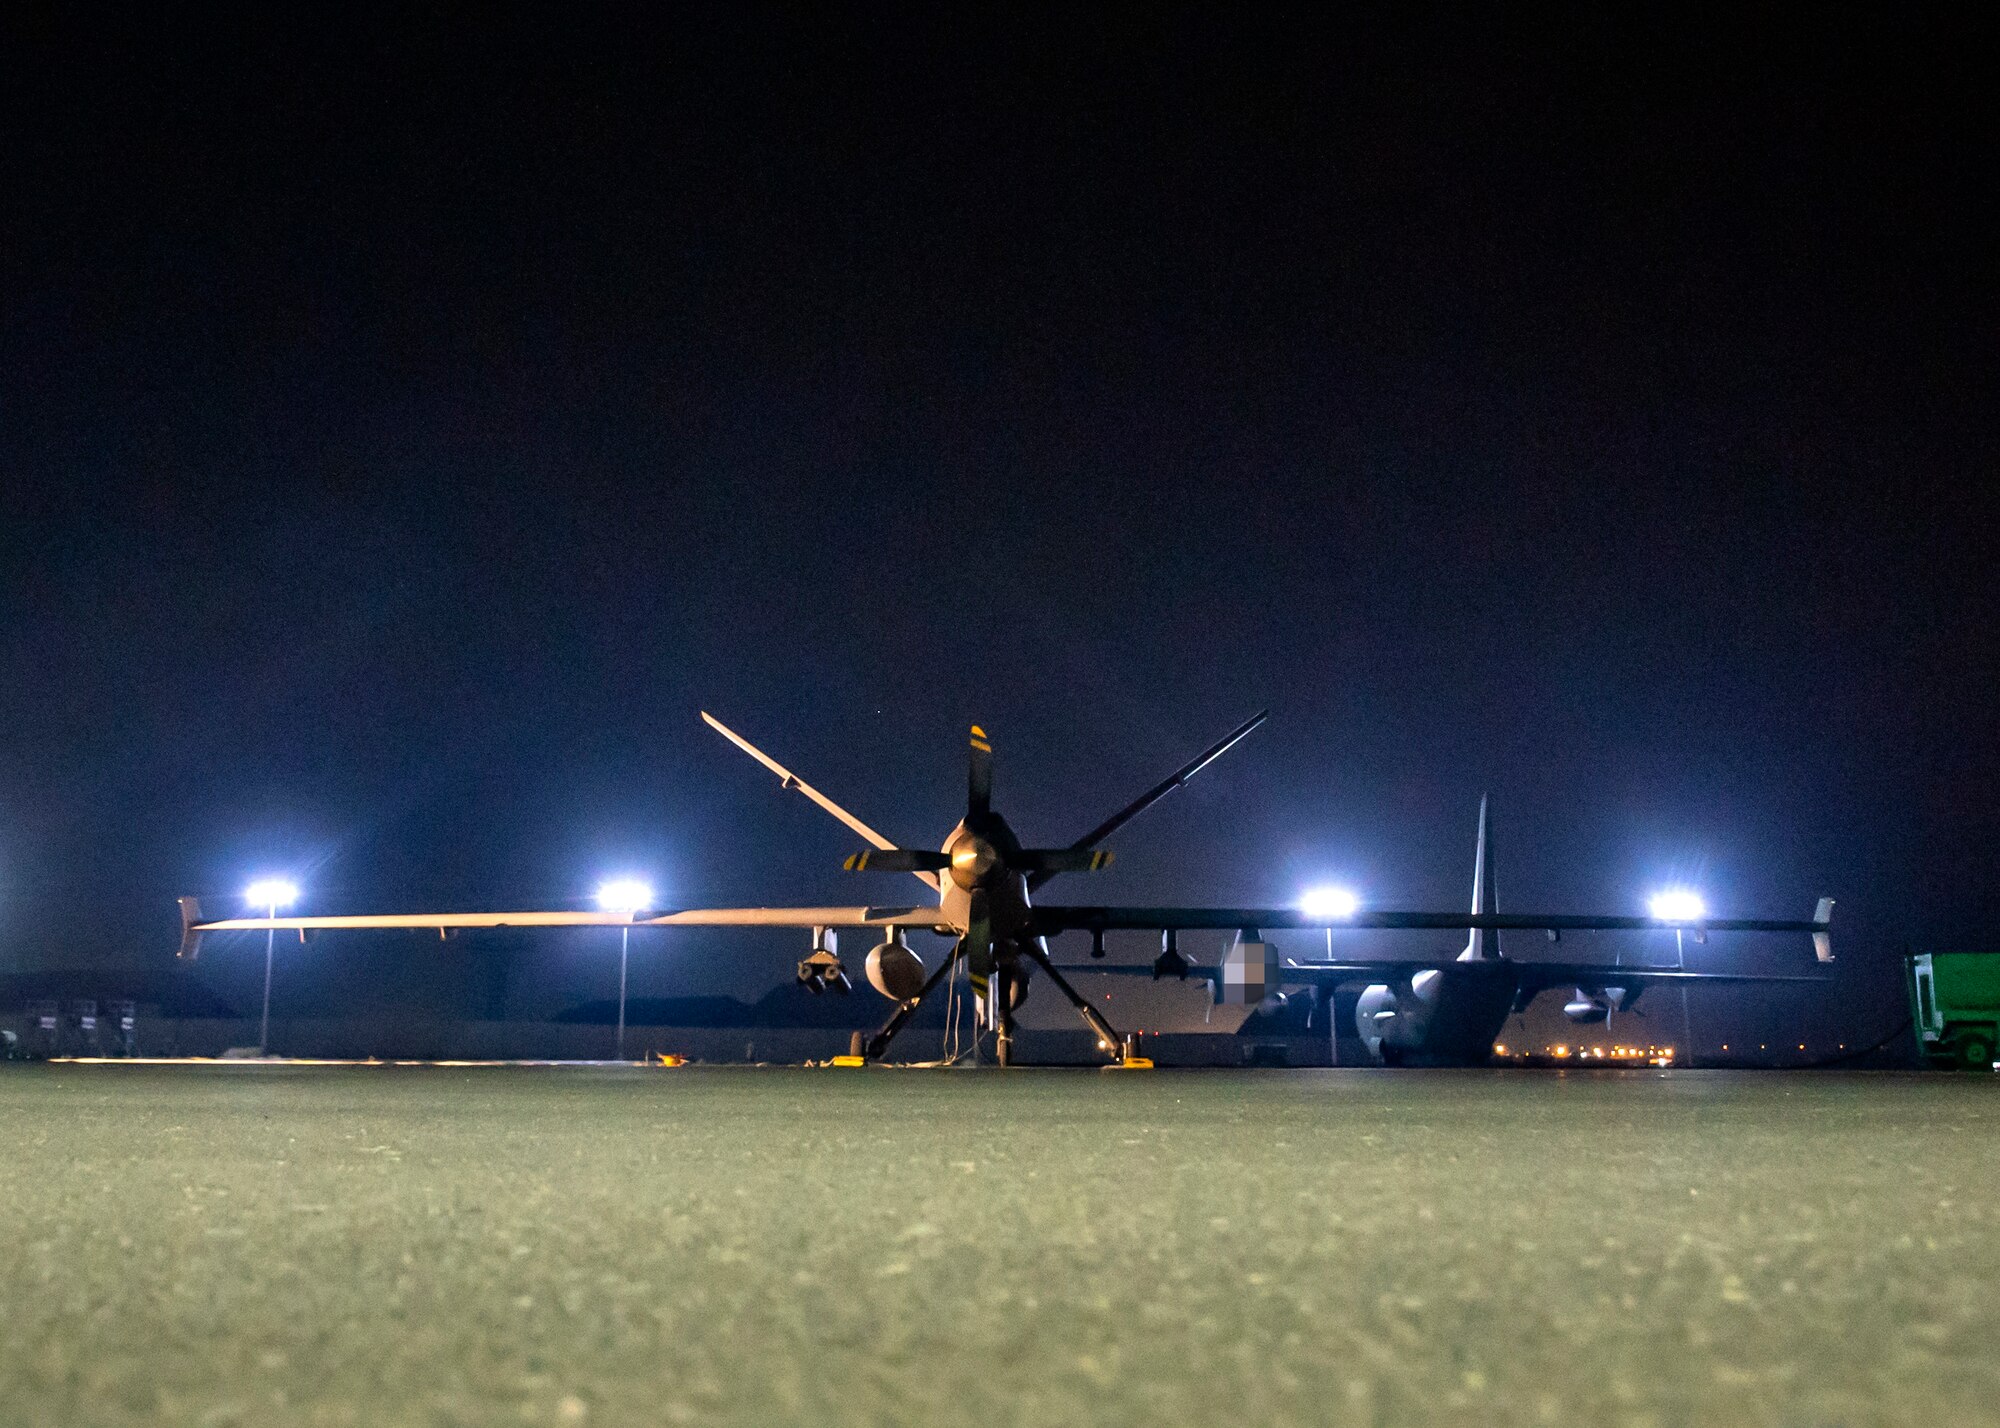 A U.S. Air Force MQ-9 aircraft assigned to the 46th Expeditionary Attack Squadron, prepares for an Operation Agile Spartan mission departing from Ali Al Salem Air Base, Kuwait, August 21, 2023. This MQ-9 and three others conducted the 386 AEW's first full air tasking order (ATO) cycle using satellite launch and recovery (SLR), providing crucial time-sensitive intelligence, surveillance and reconnaissance to leaders throughout the CENTCOM area of responsibility. (This photo has been altered for security purposes) (U.S. Air Force photo by Tech. Sgt. Isaac Garden)